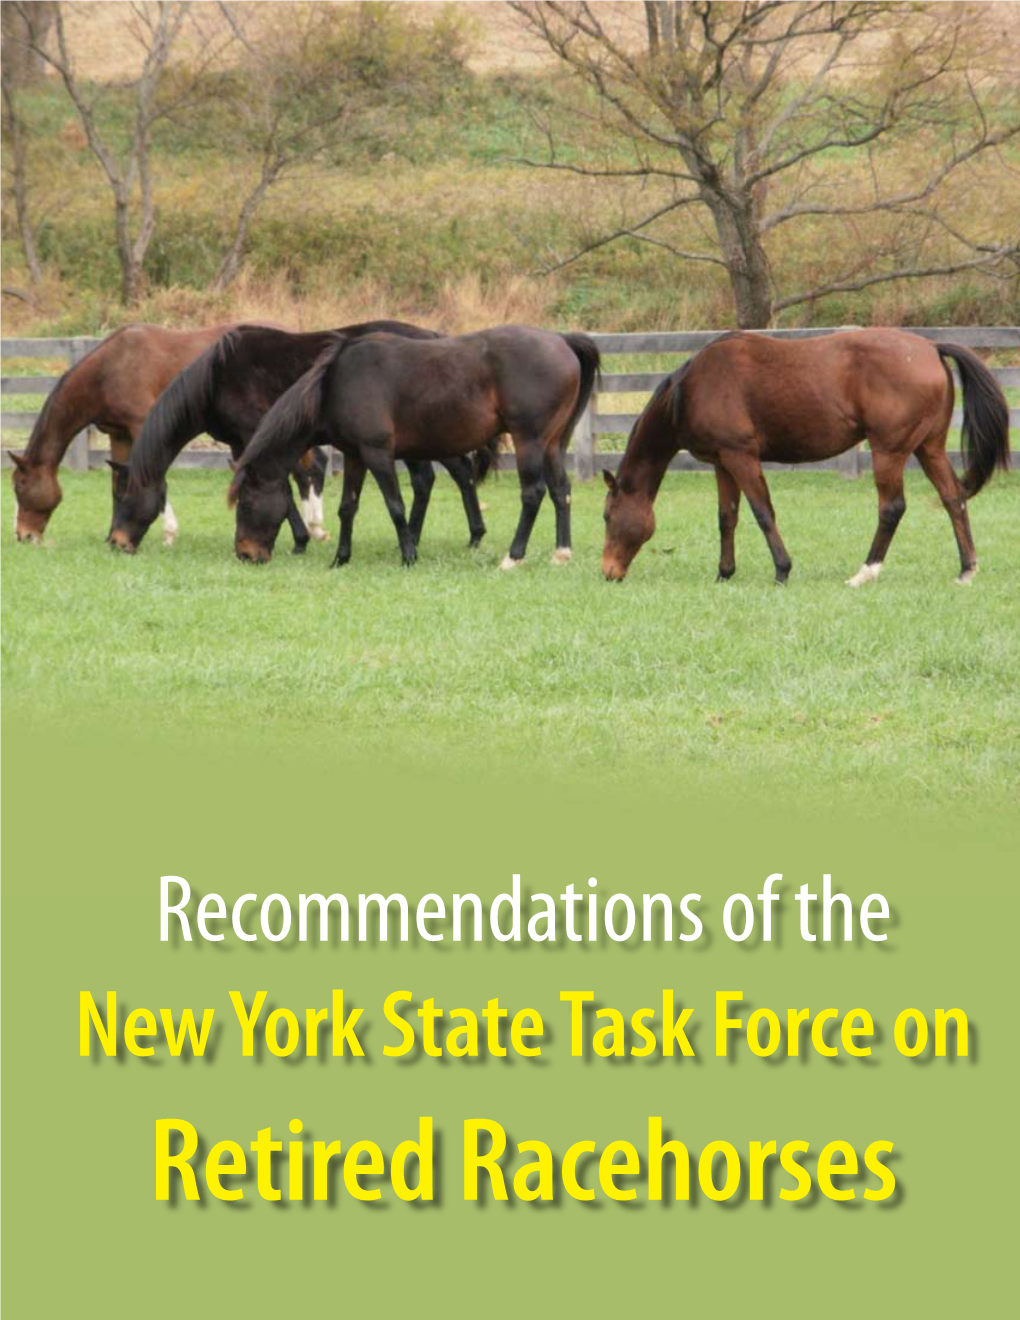 New York State Task Force on Retired Racehorses Members of the Task Force on Retired Racehorses